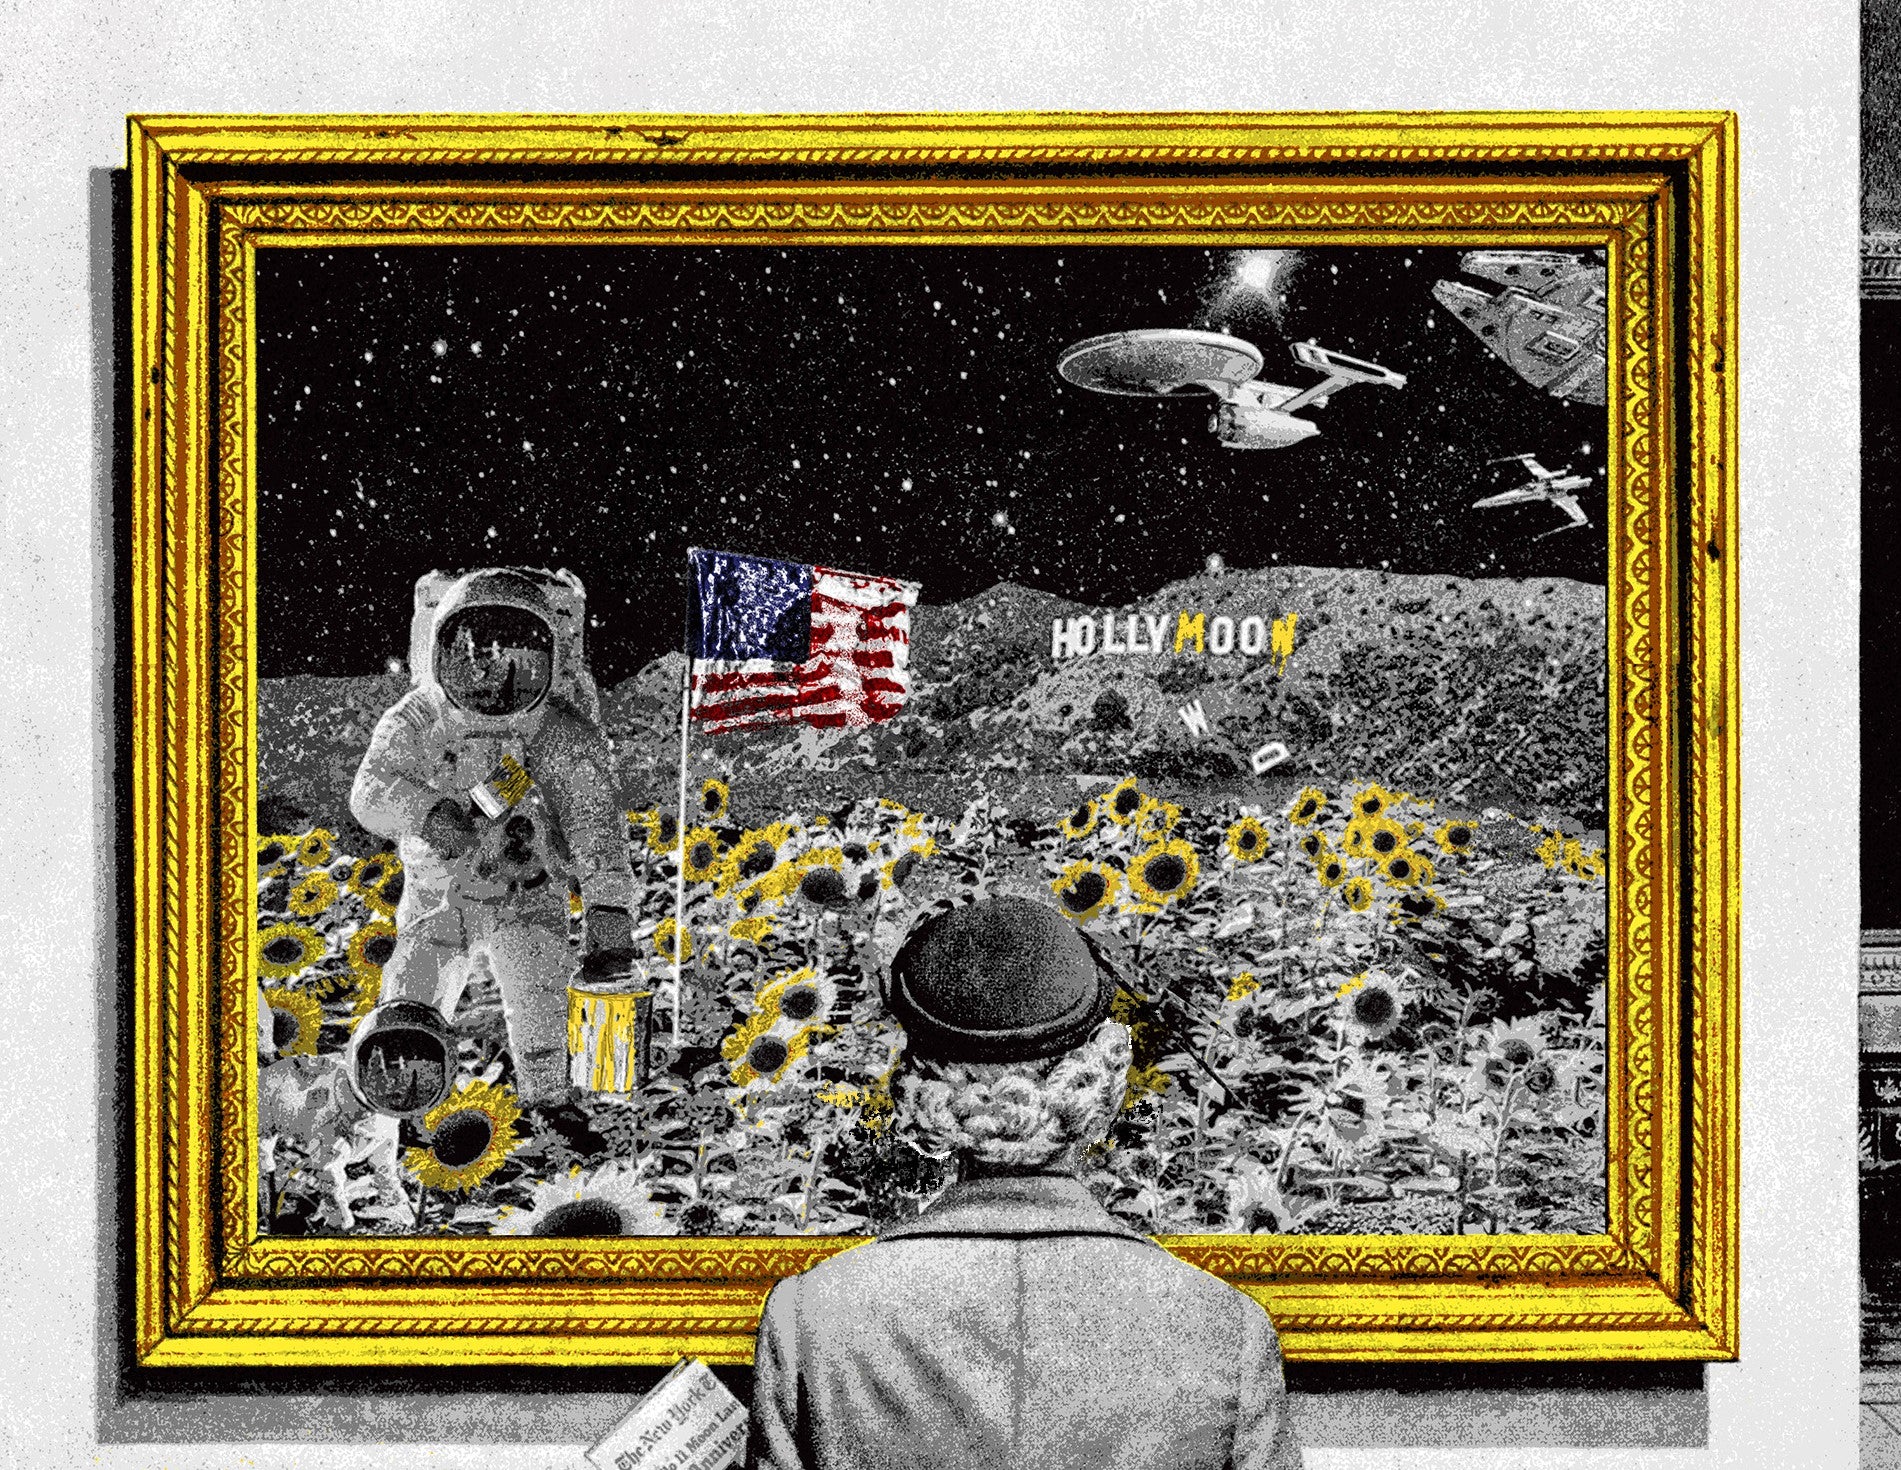 Title:  Hollymoon  Artist:  Mr. Brainwash  Edition:   In 1969, man first landed on the moon. Fifty years later, we celebrate this monument with a limited edition release of 50 total prints. The Apollo 11 landing is featured in this Hollymoon scene that sparks wonder for this testament to space travel.  This version is the standard edition of 50, 8 colors and is signed and numbered with a thumbprint on the back.  Type:  8 color screen print on archival art paper  Size:   33.5" x 42"